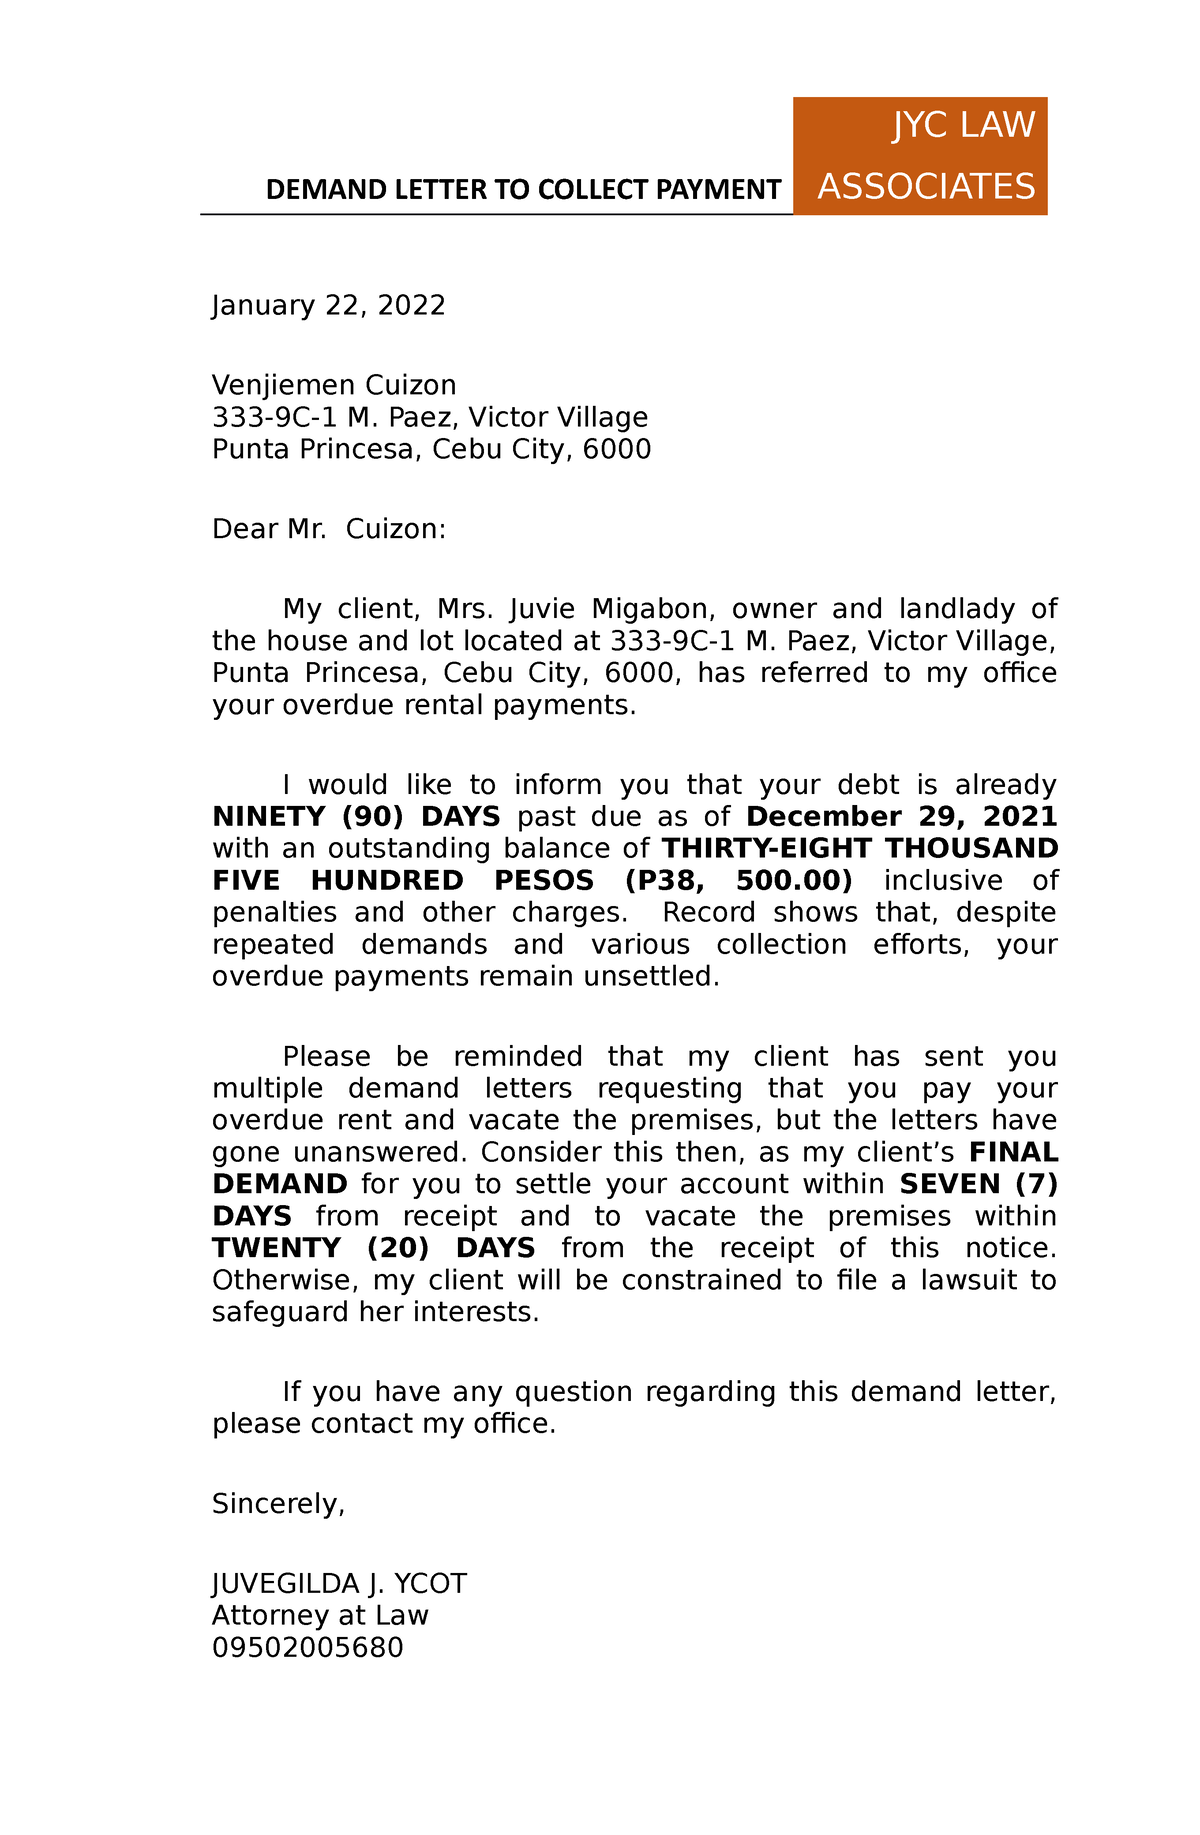 Demand Letter From Attorney Sample Philippines - vrogue.co